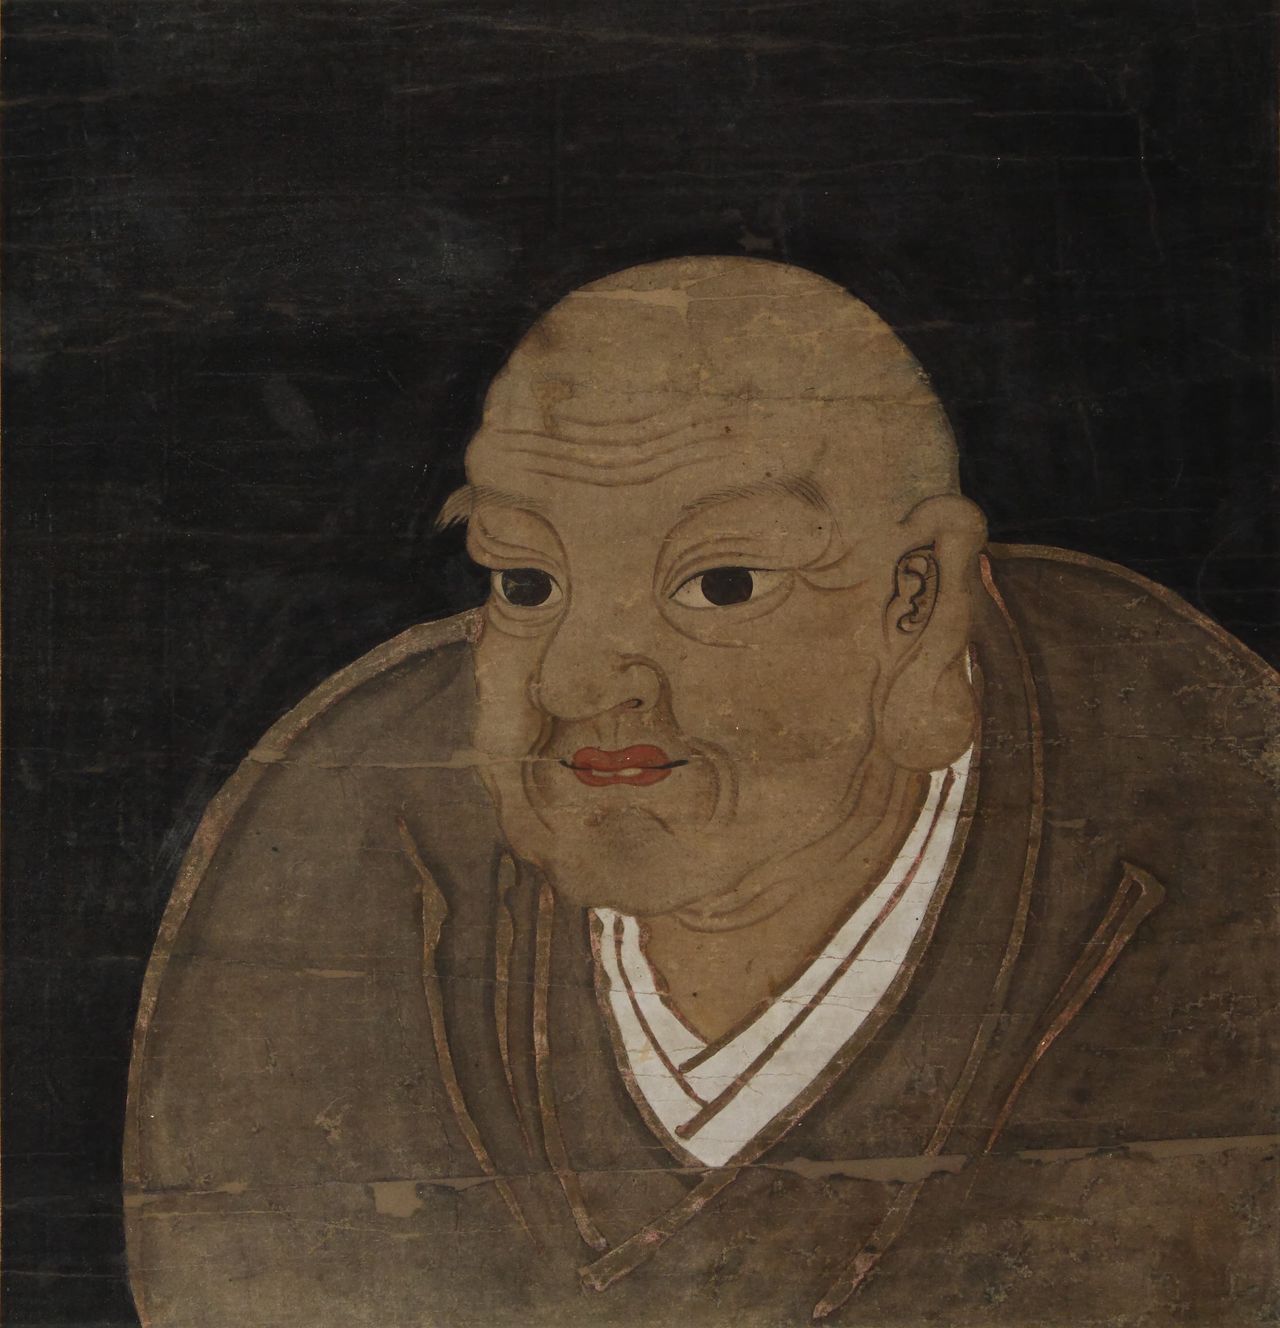 (Photo: A portait of Nichiren from the collection of the temple Kuonji in Yamanashi Prefecture.)